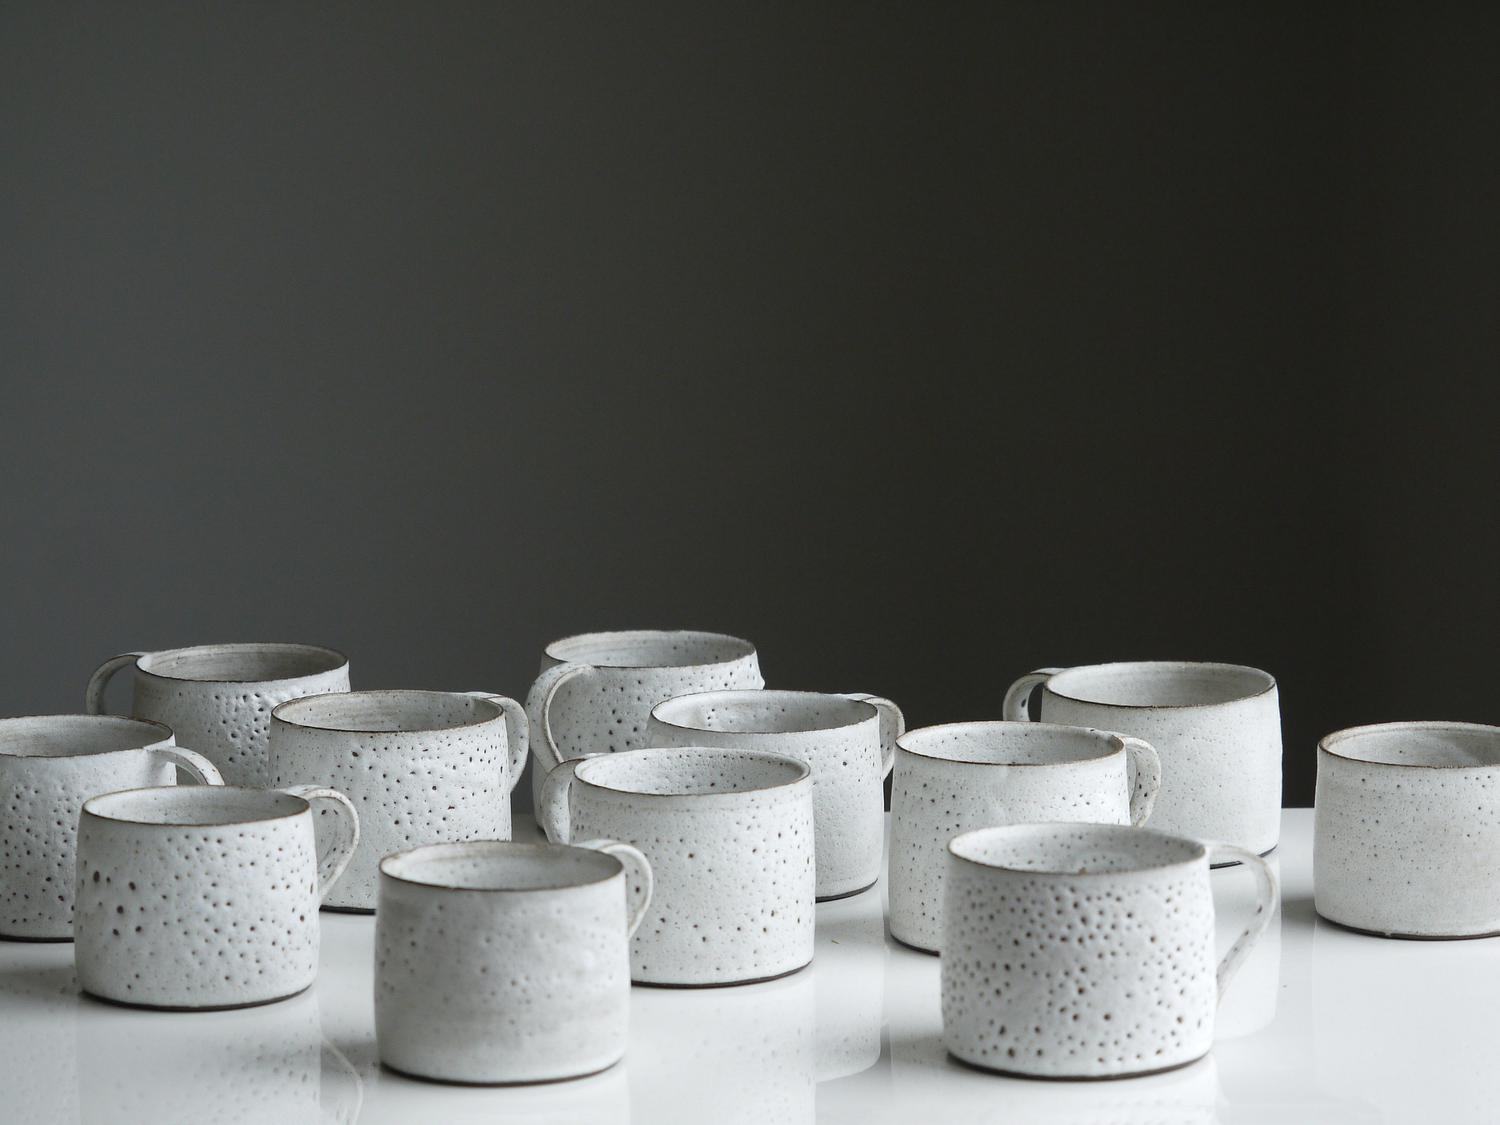 Slowly, gently: a ceramic collection by Waymbul Studios